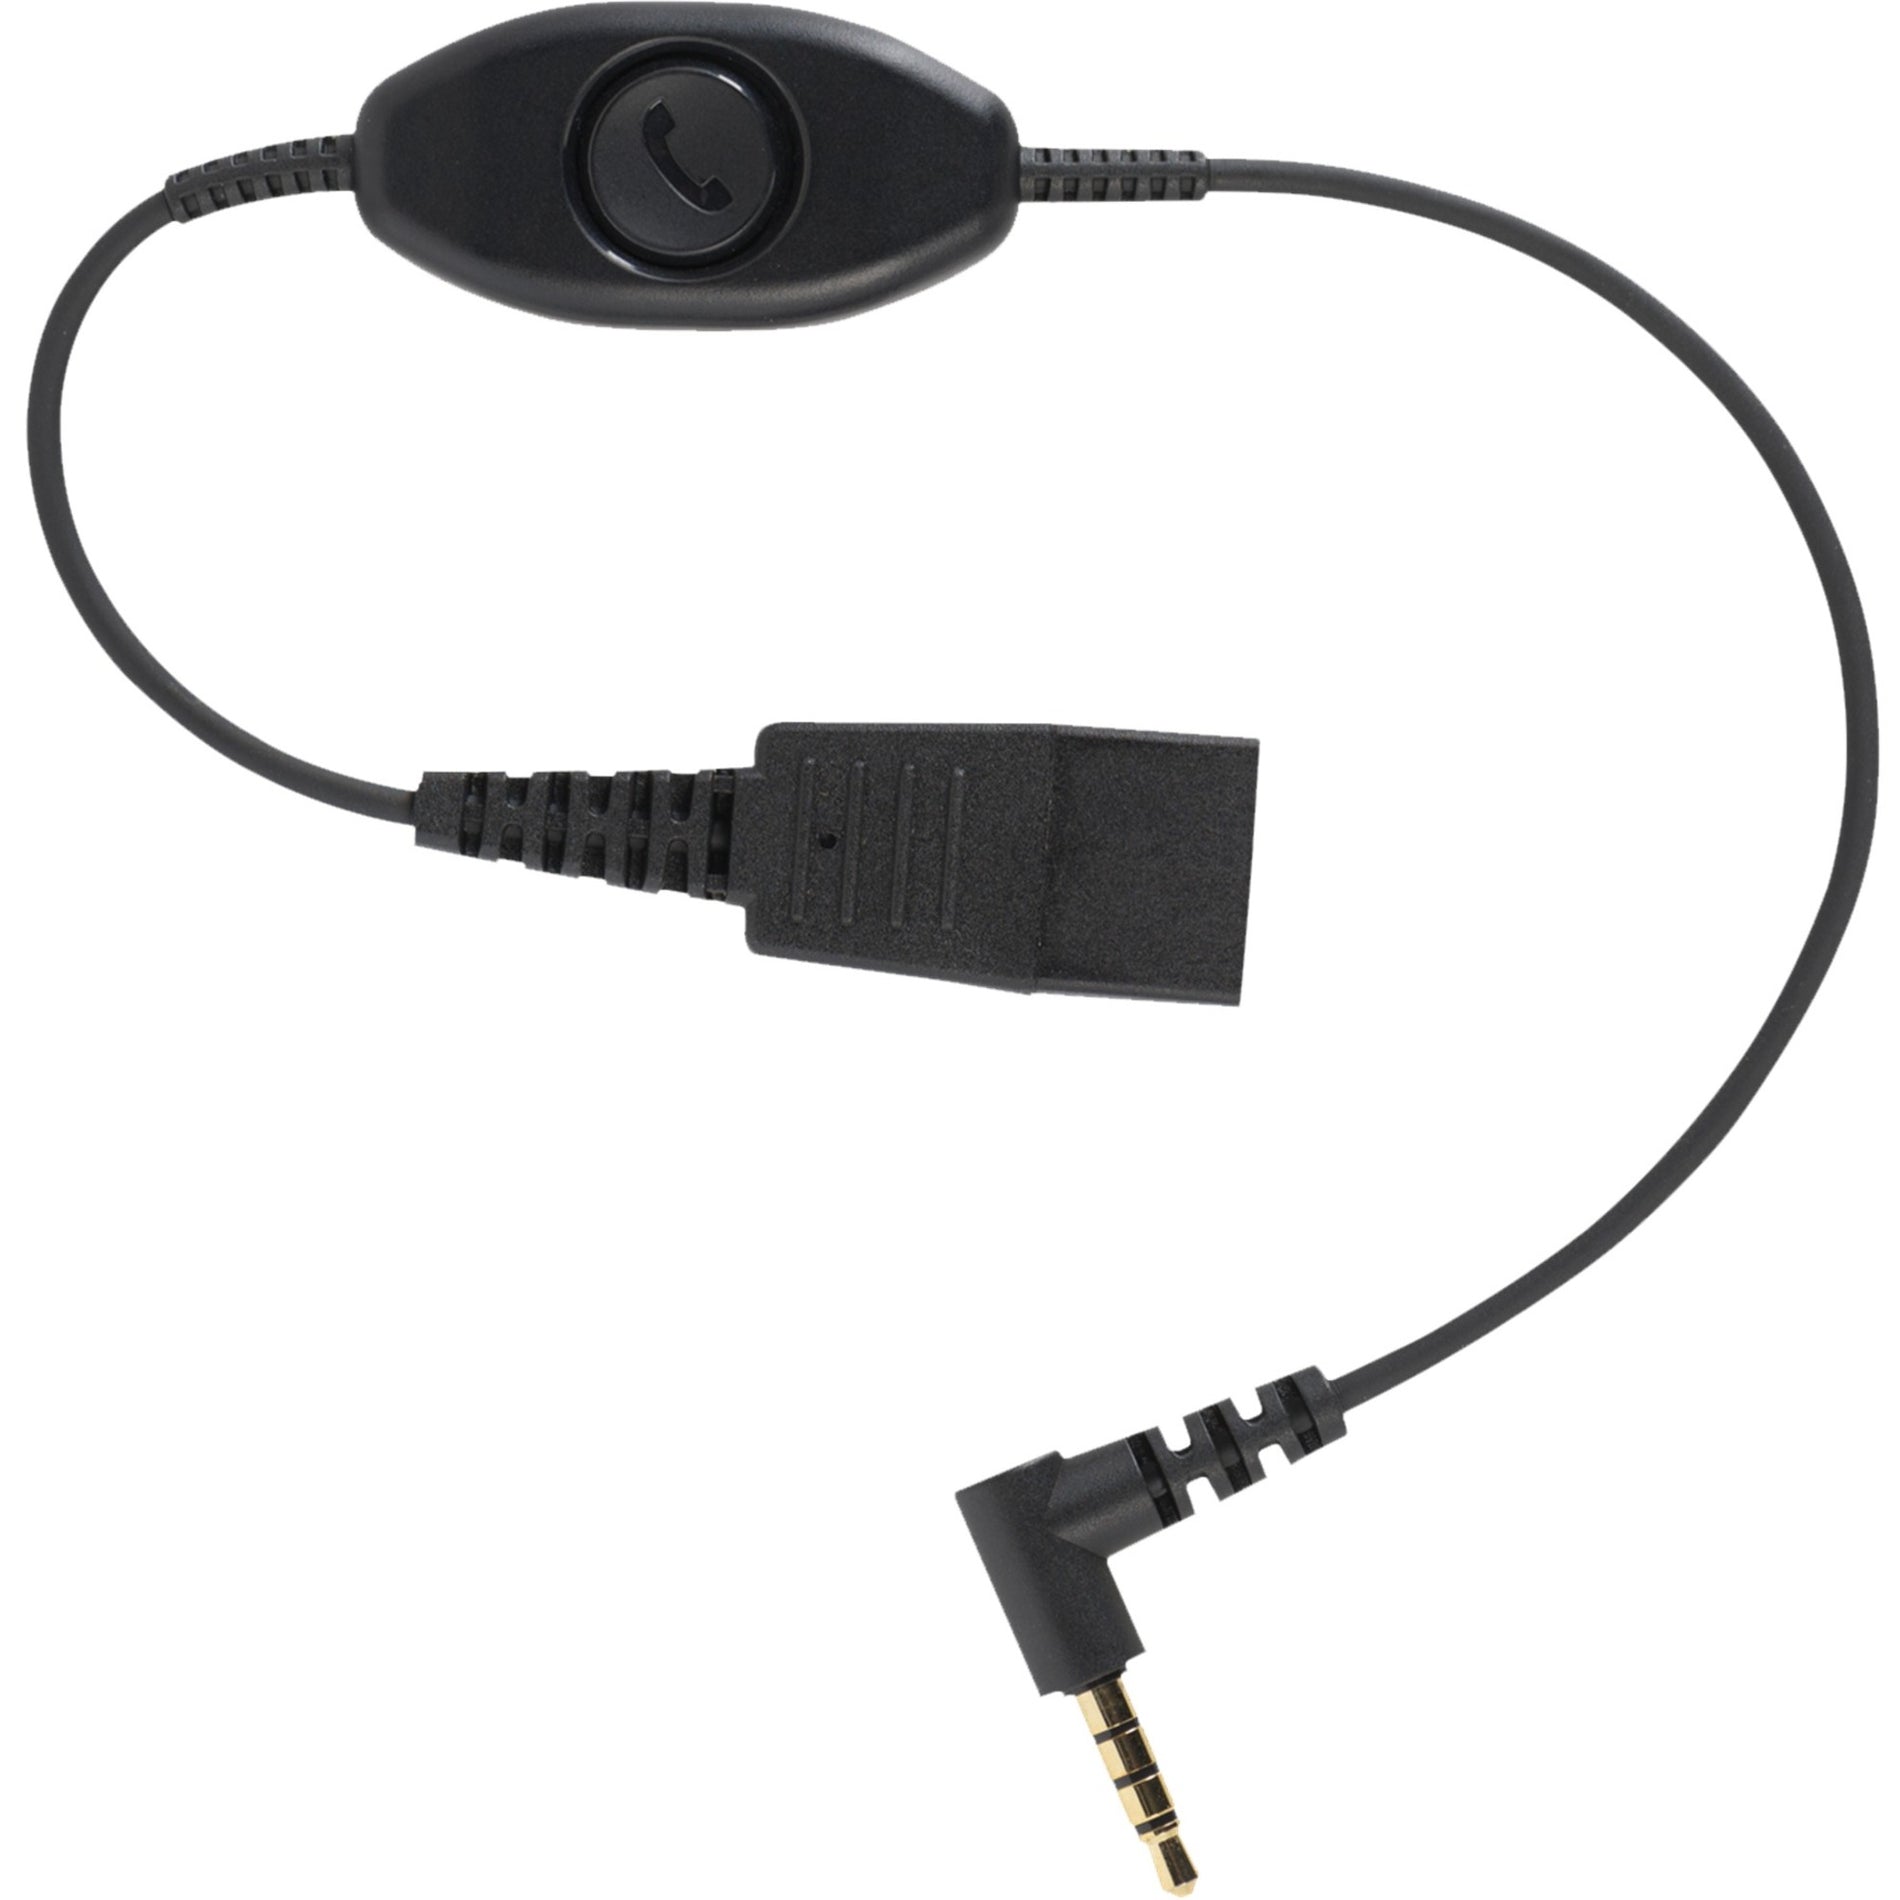 Jabra 8800-00-103 Quick Disconnect (qd) to 3.5mm Phone Cord (0.3m), Compatible with iPhone, Samsung Galaxy, and More